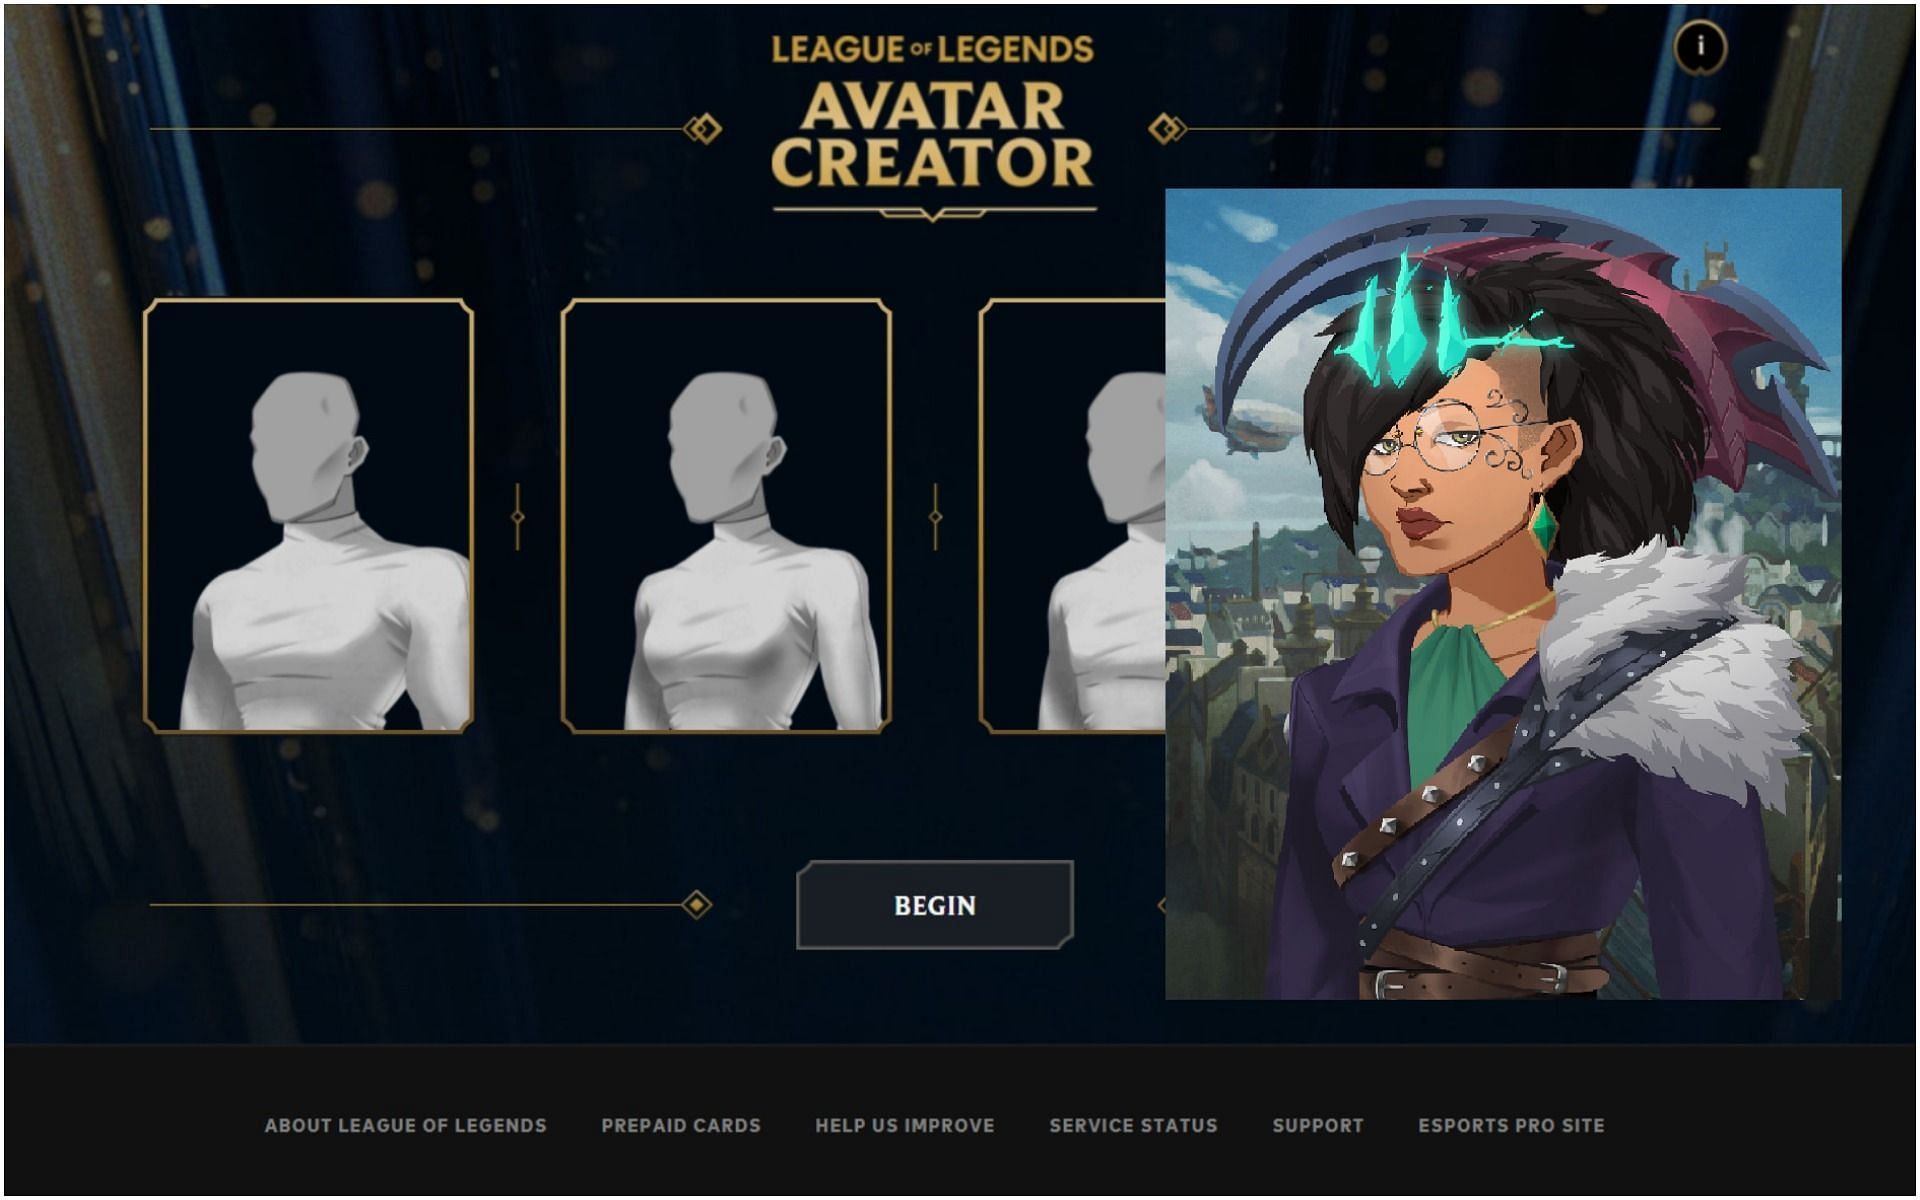 How to use Avatar Creator by League of Legends? (Image via League of Legends)